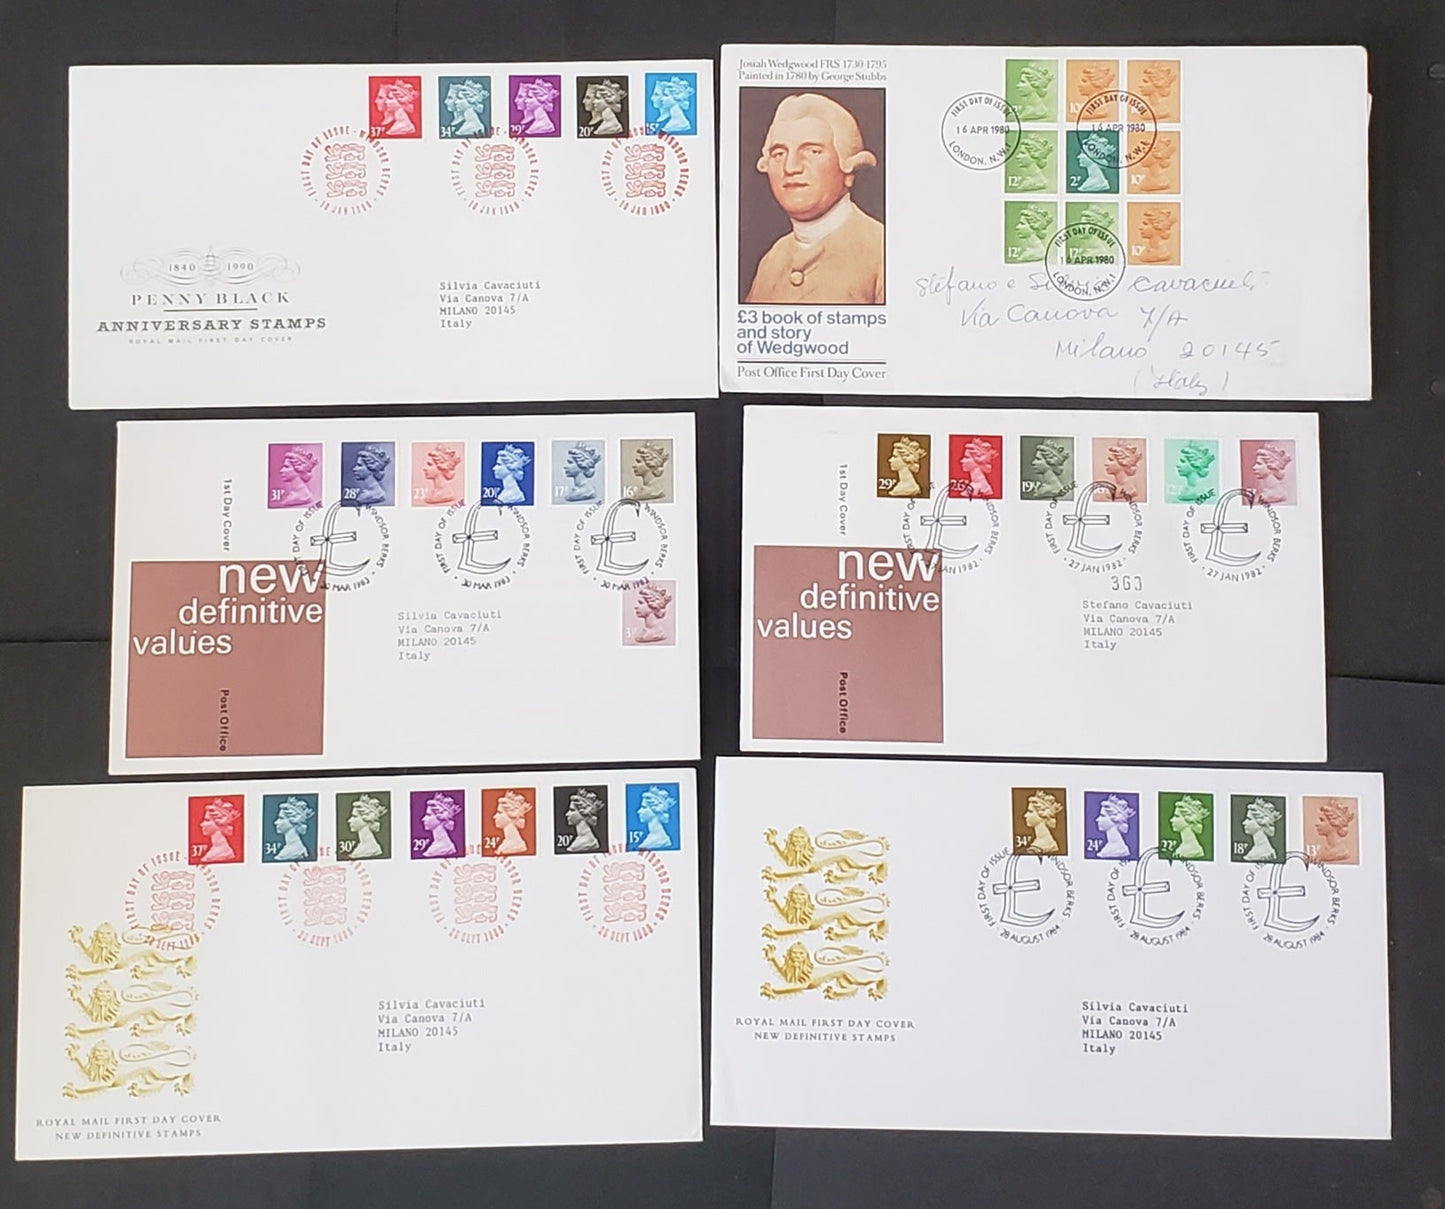 Lot 376 Great Britain 1973-1990 Machin Defintive First Day Covers, 9 Different, 2018 Gibbons Concise Converted Cat. $40.60